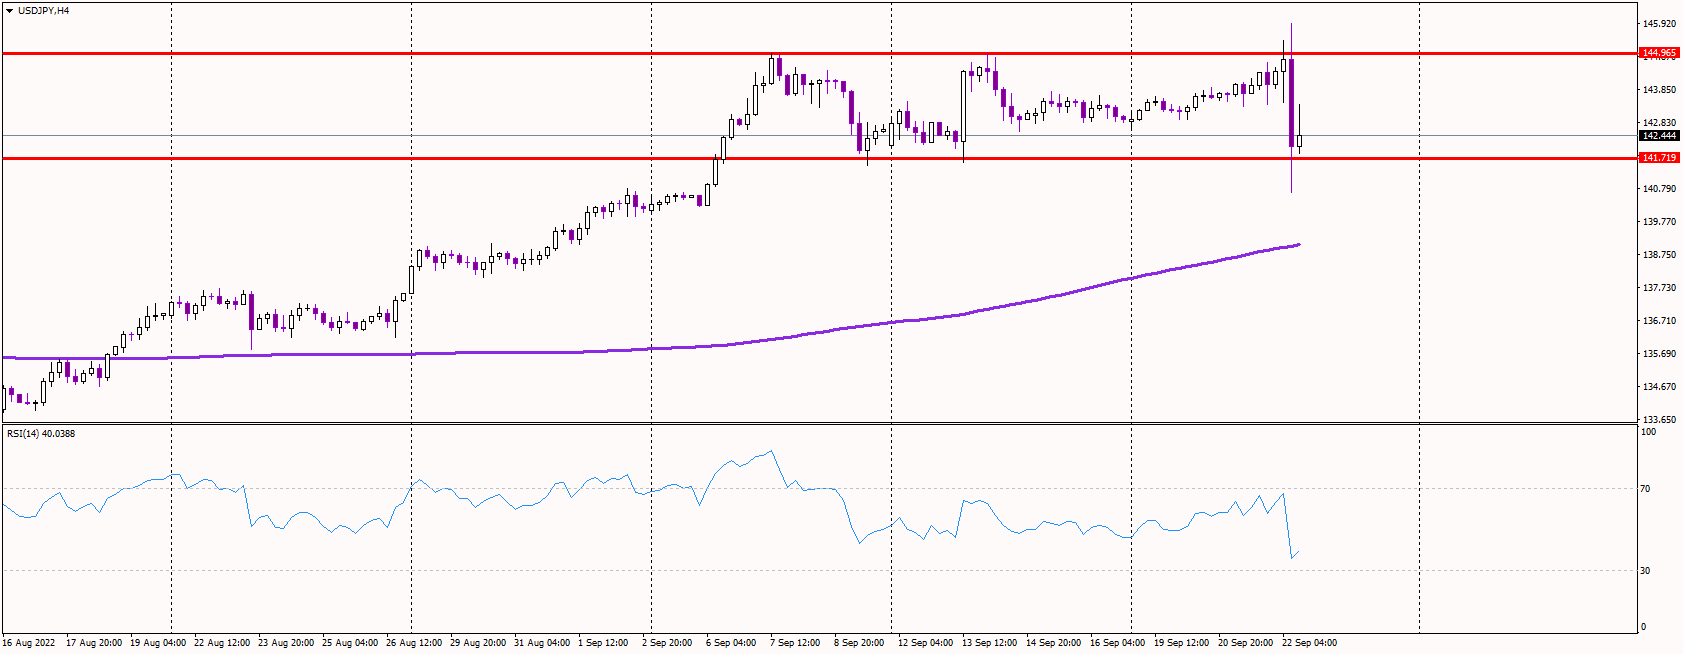 USDJPY Shows Extreme Volatility amid Government Intervention